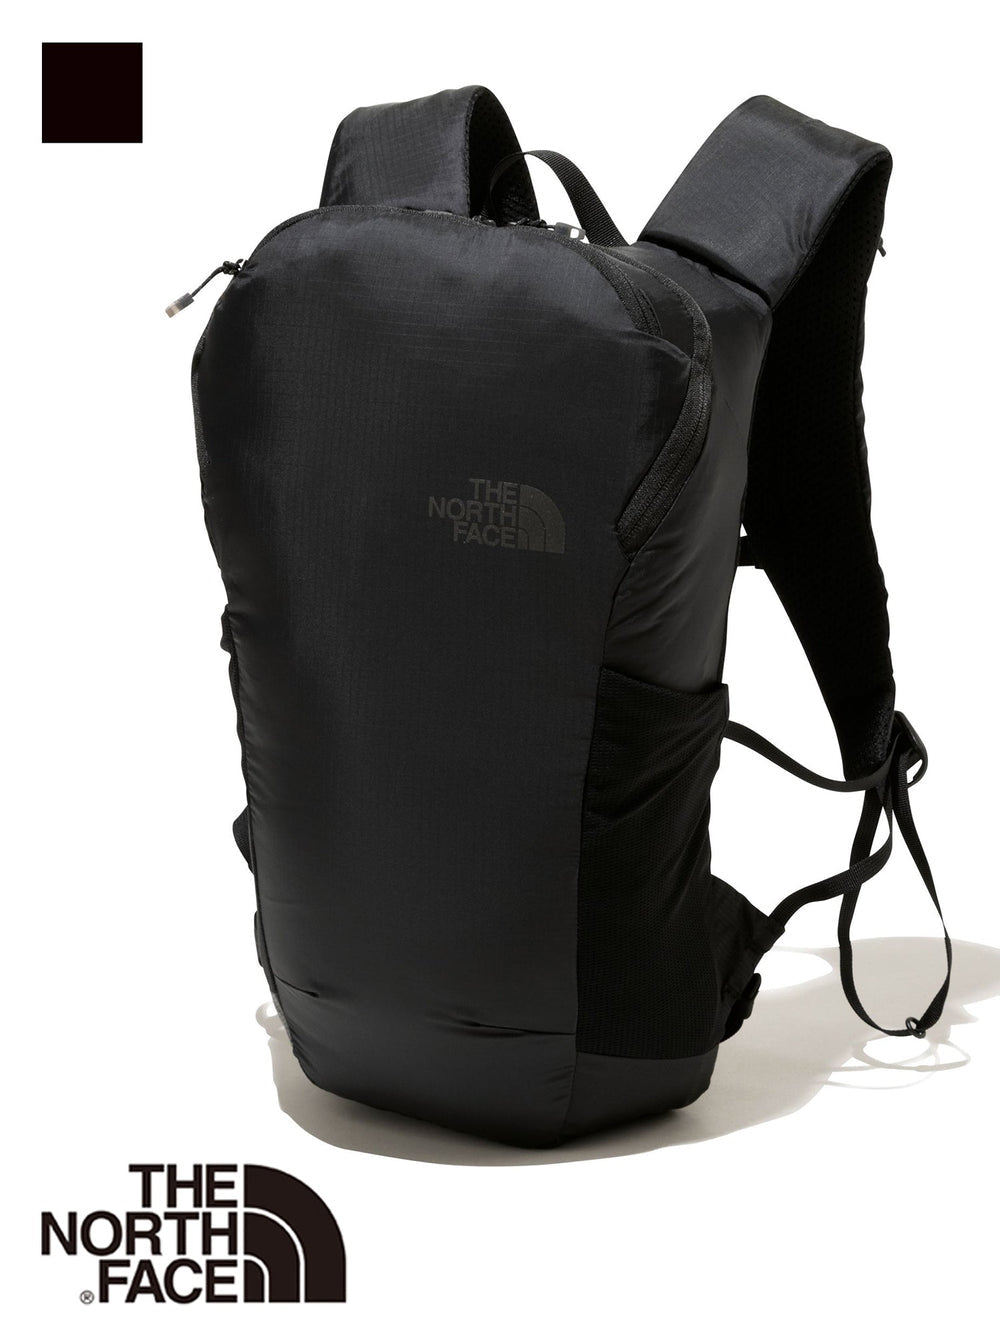 [SALE][THE NORTH FACE] One Mile 12 North Face Outdoor Rucksack Daypack Men's Women's / 12L 22SS NM62151